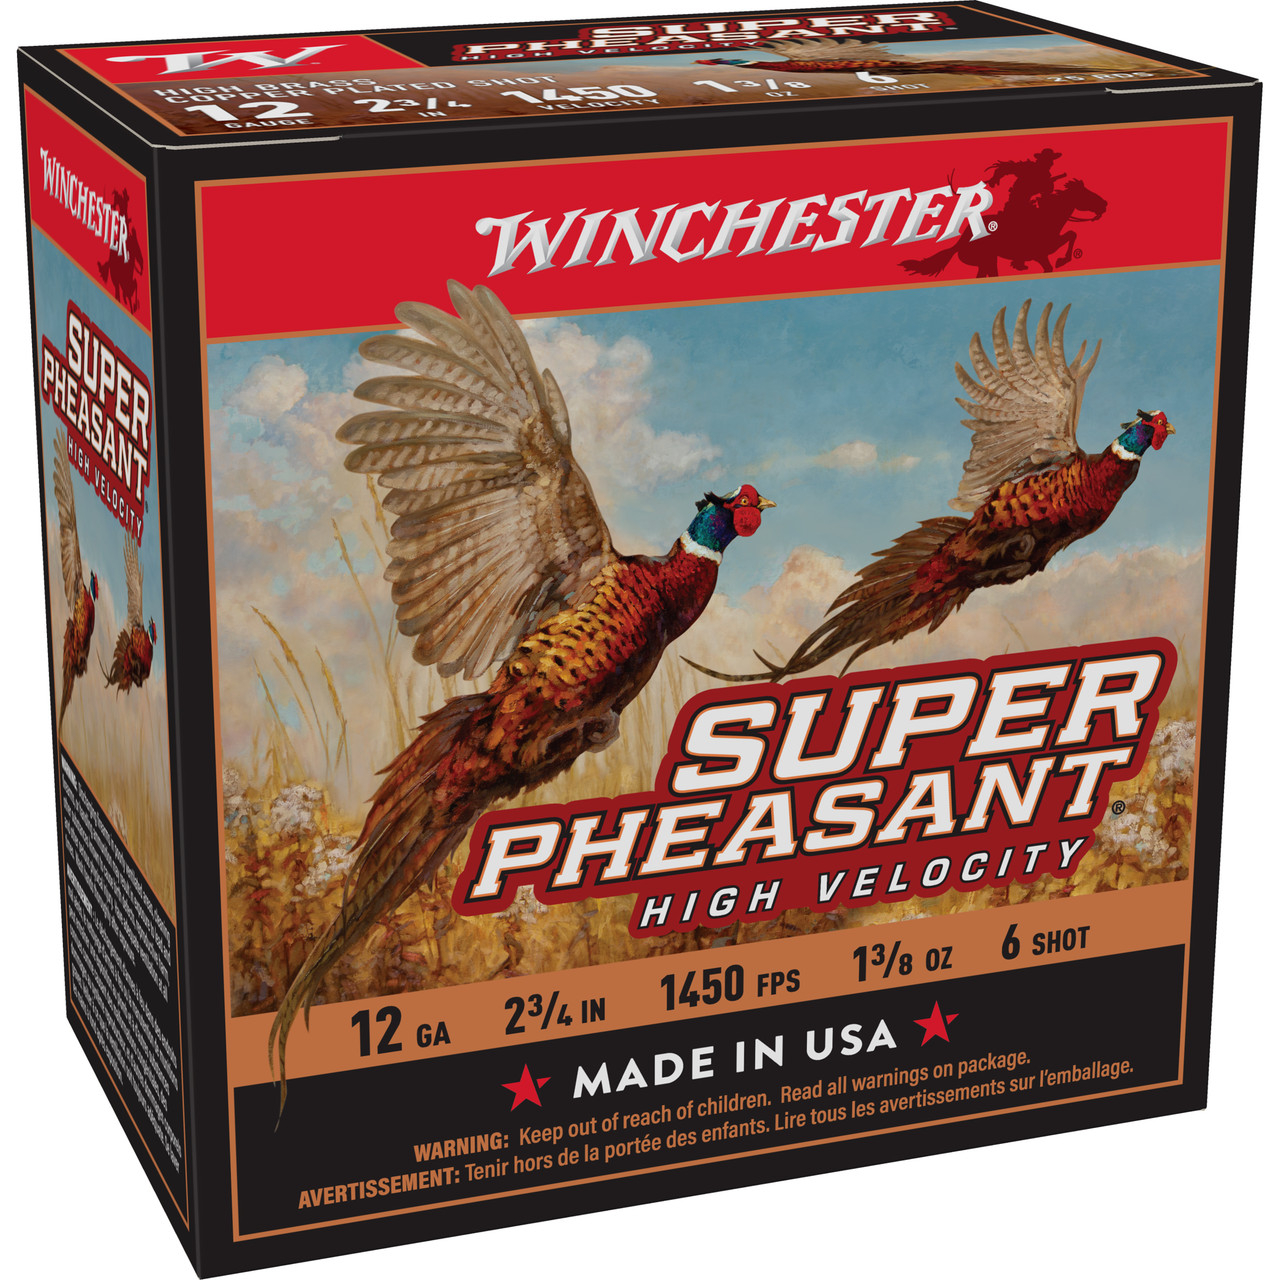 25 Rounds of Bulk 12ga Ammo by Winchester - 1 ounce #6 1/2 steel shot